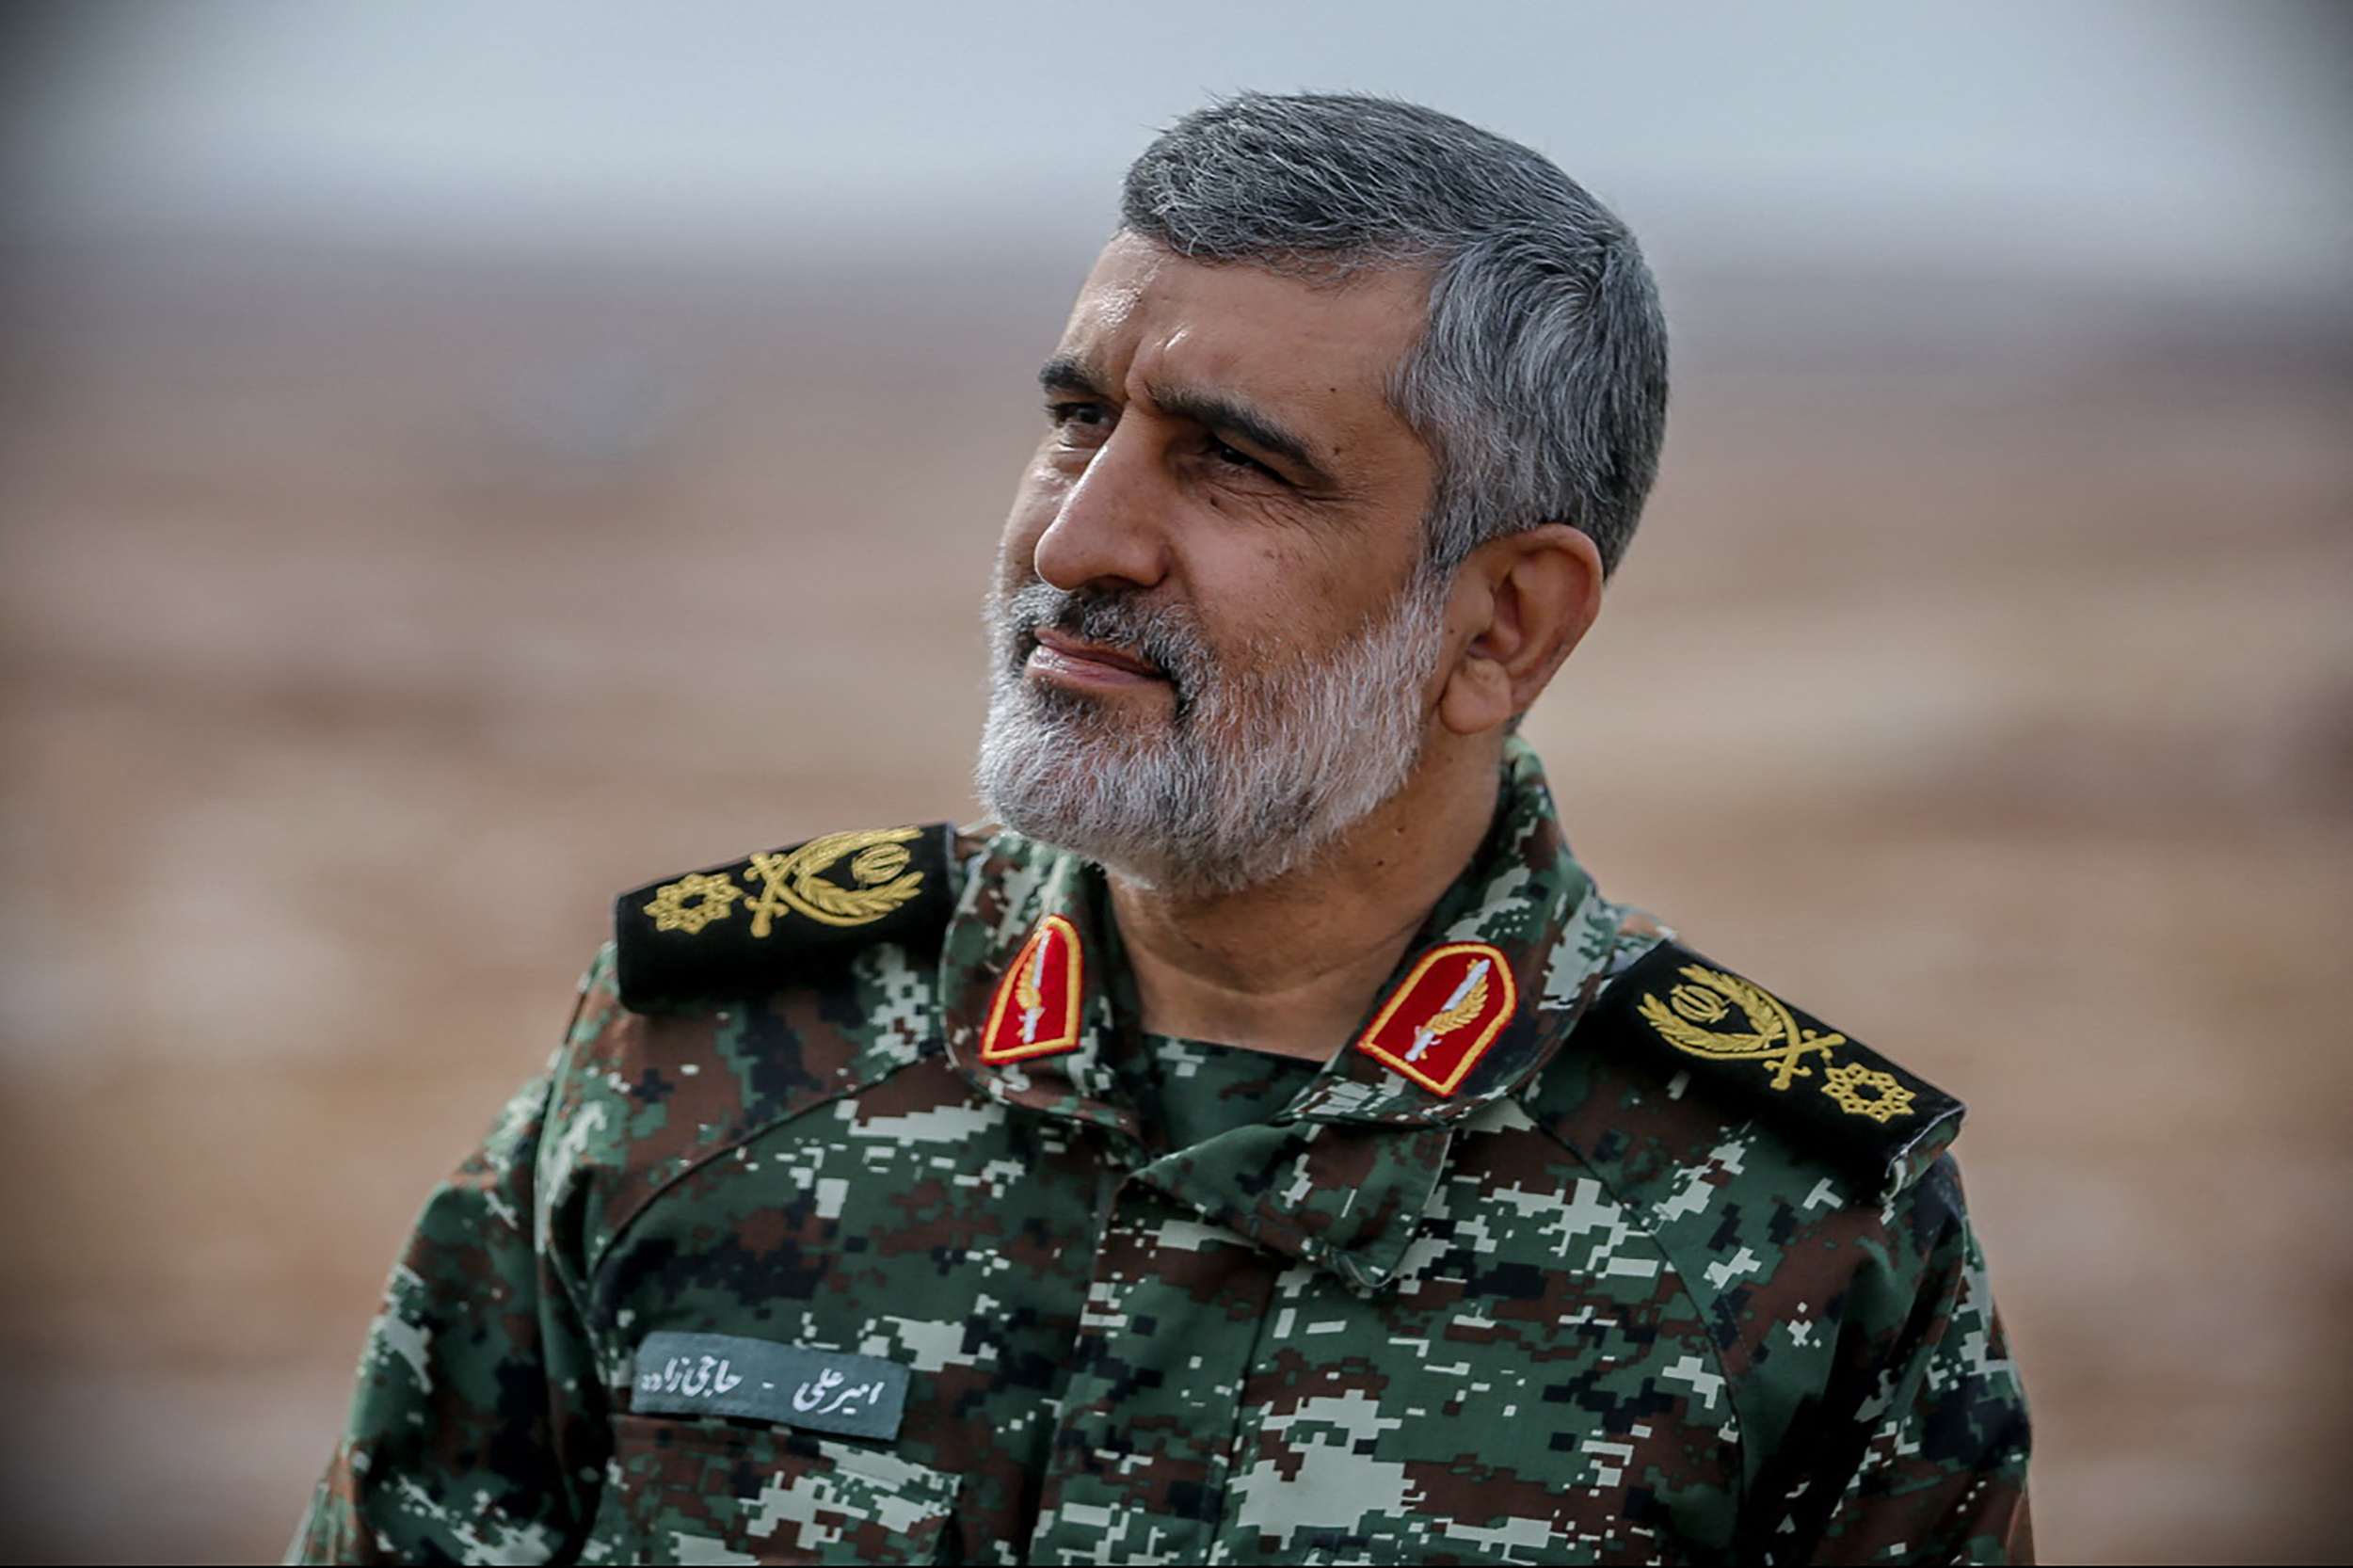 IRGC general states that Iran utilized just 20% of its military capabilities in retaliation against Israel, known as Operation True Promise